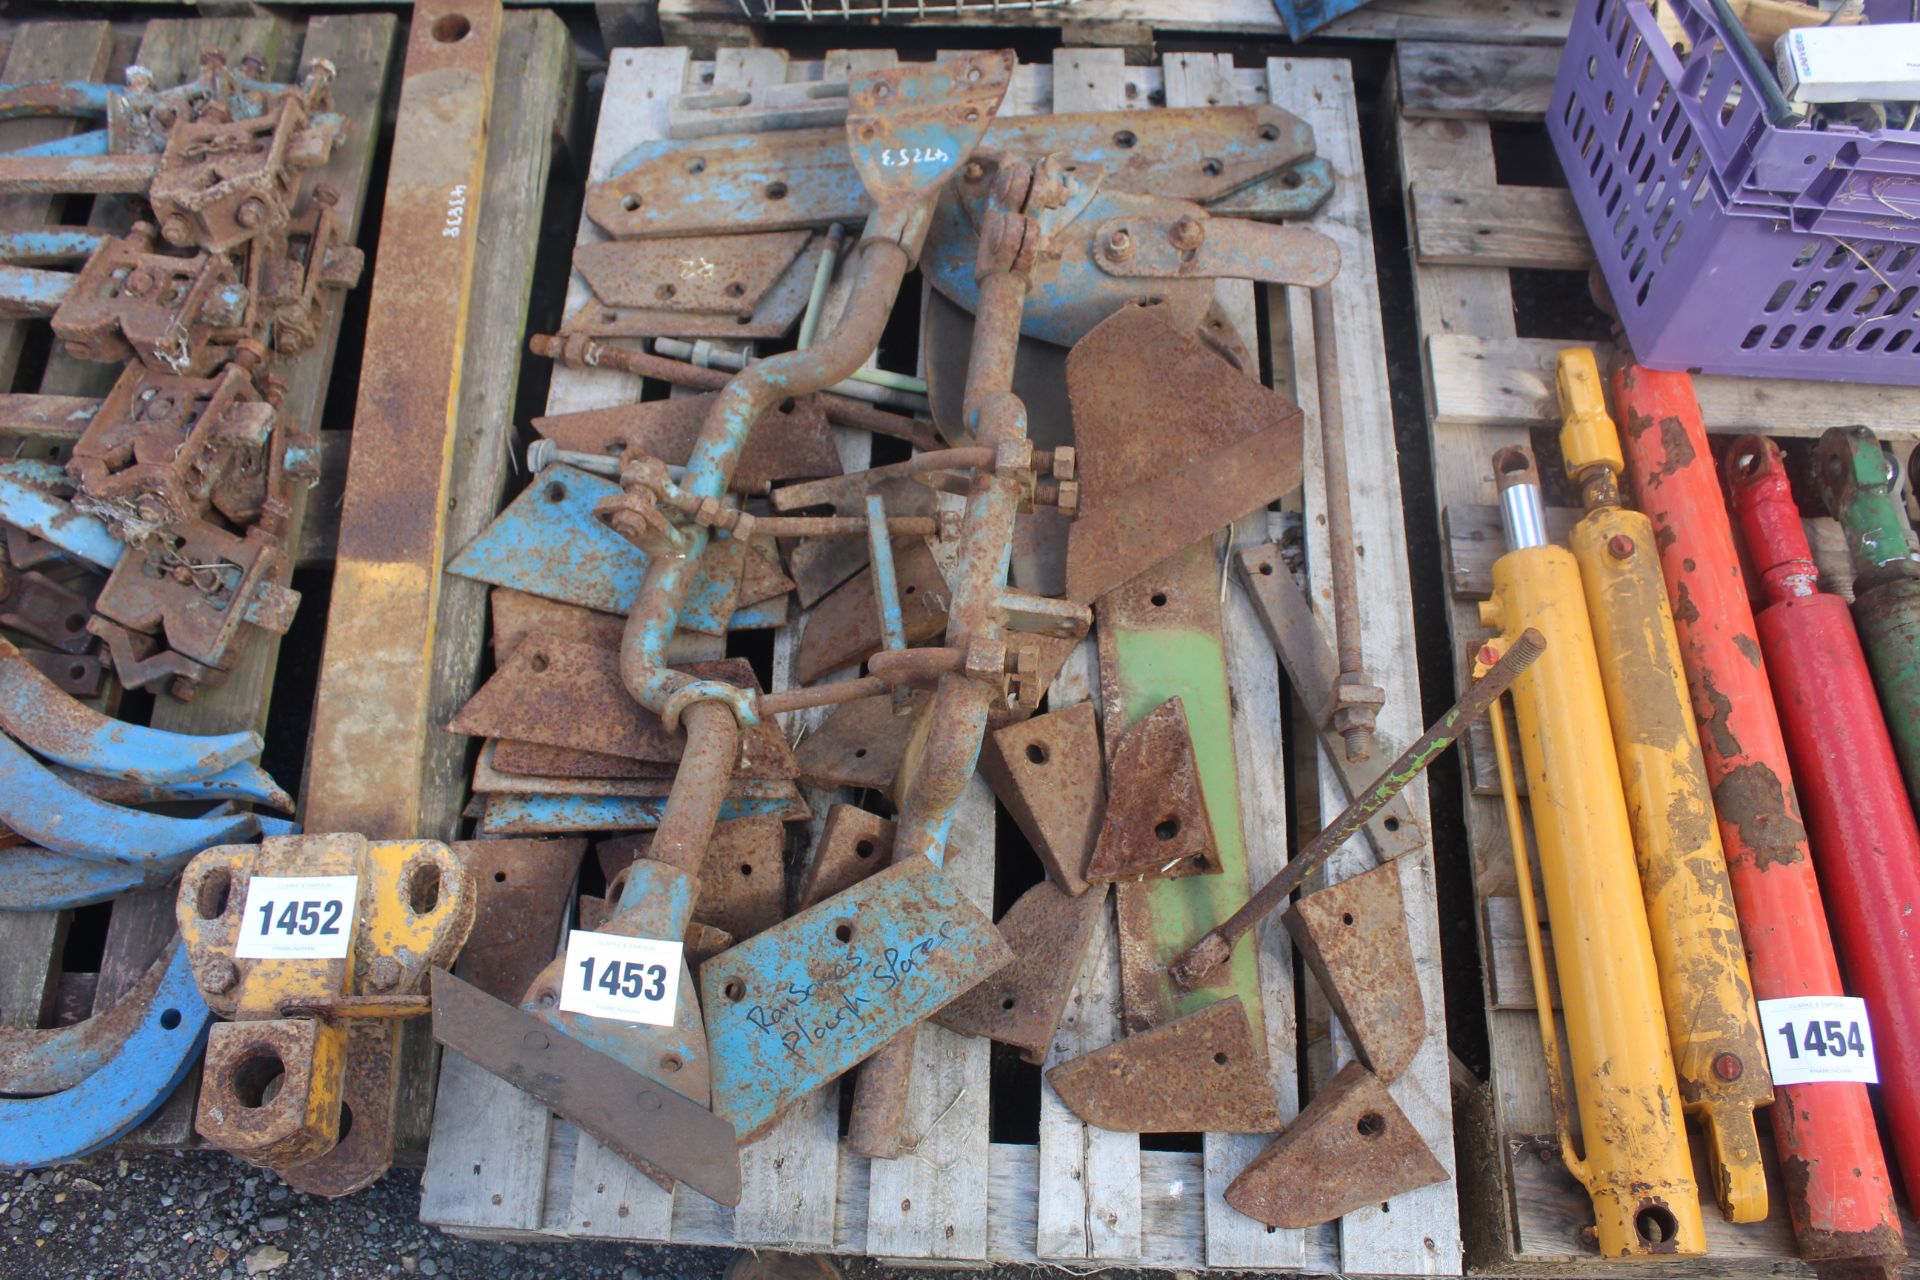 Ransomes plough spares.